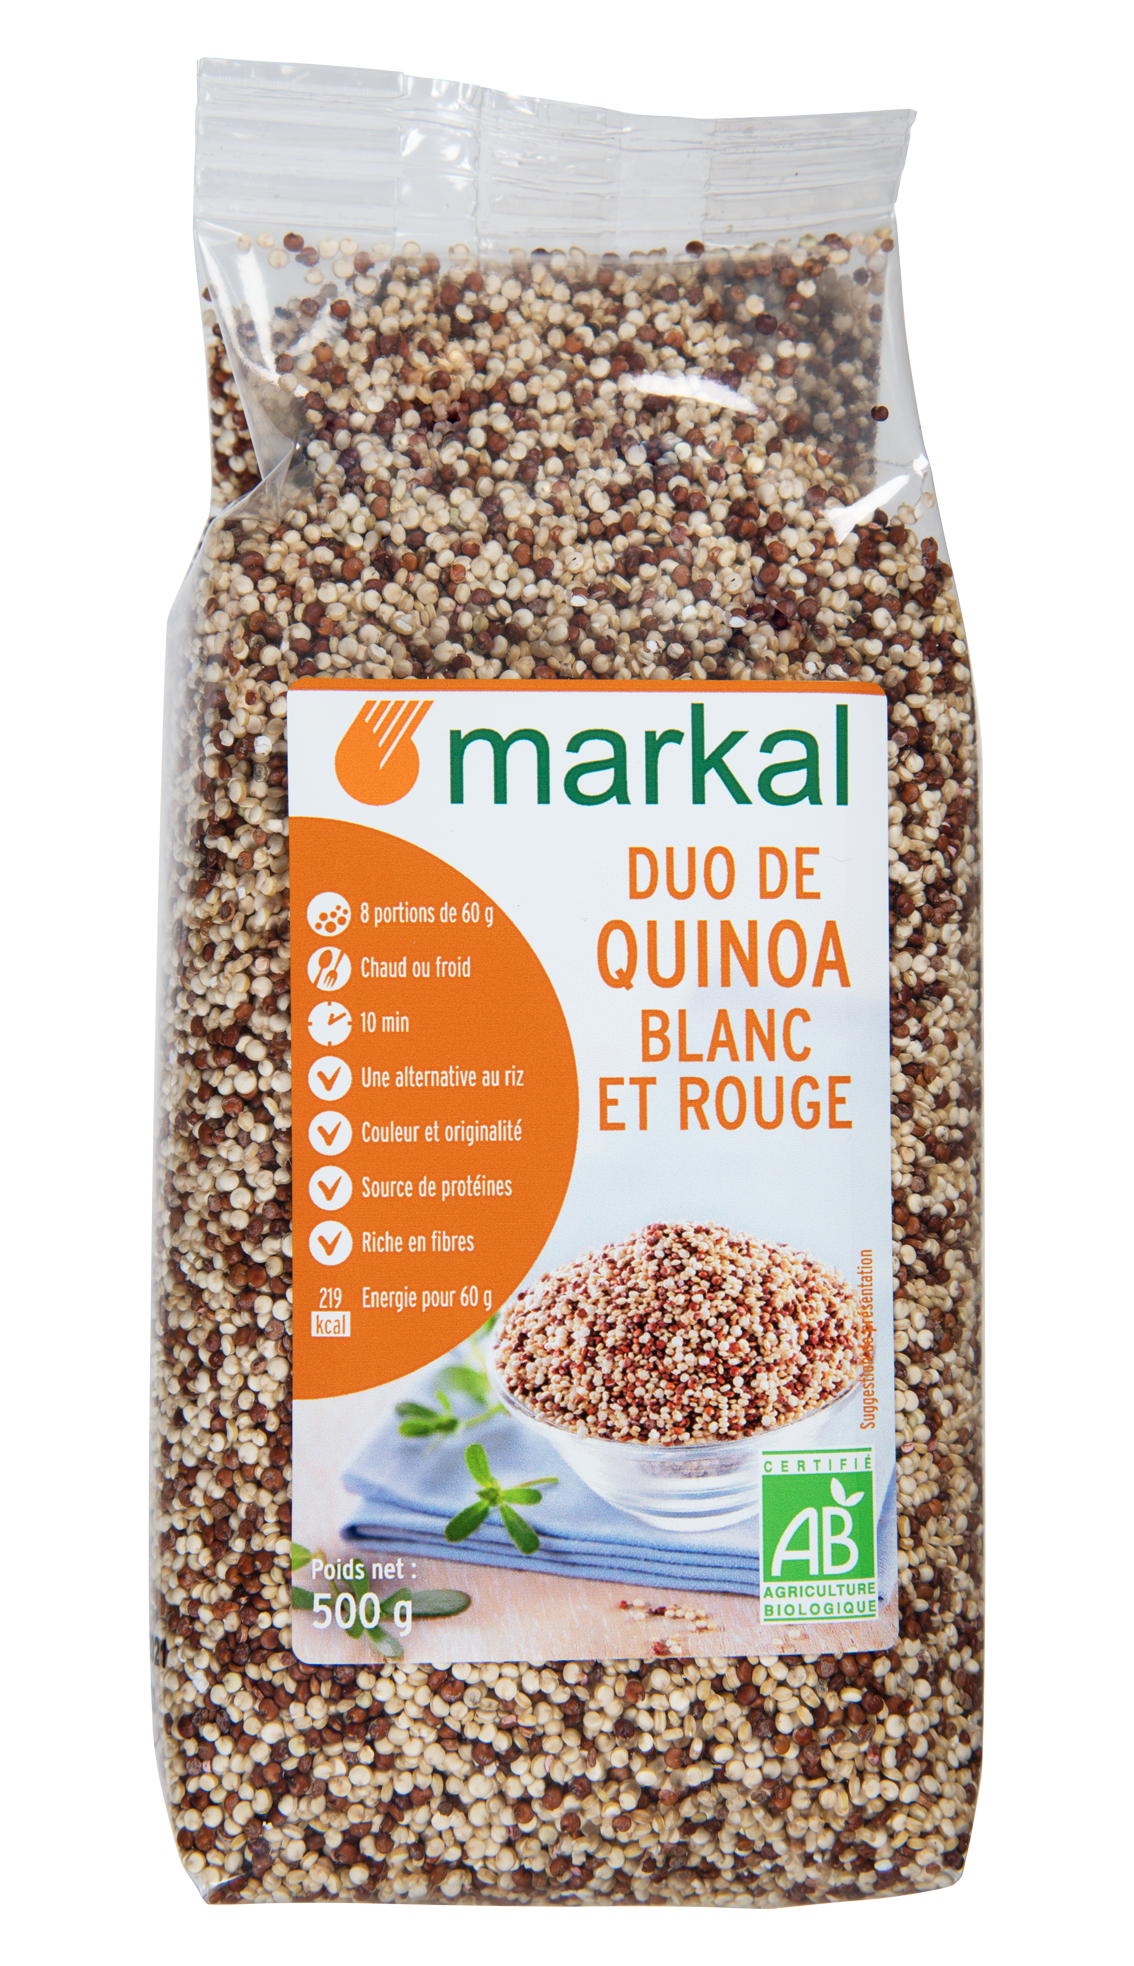 MARKAL - ORGANIC RED AND WHITE QUINOA MIX FRENCH - 500G